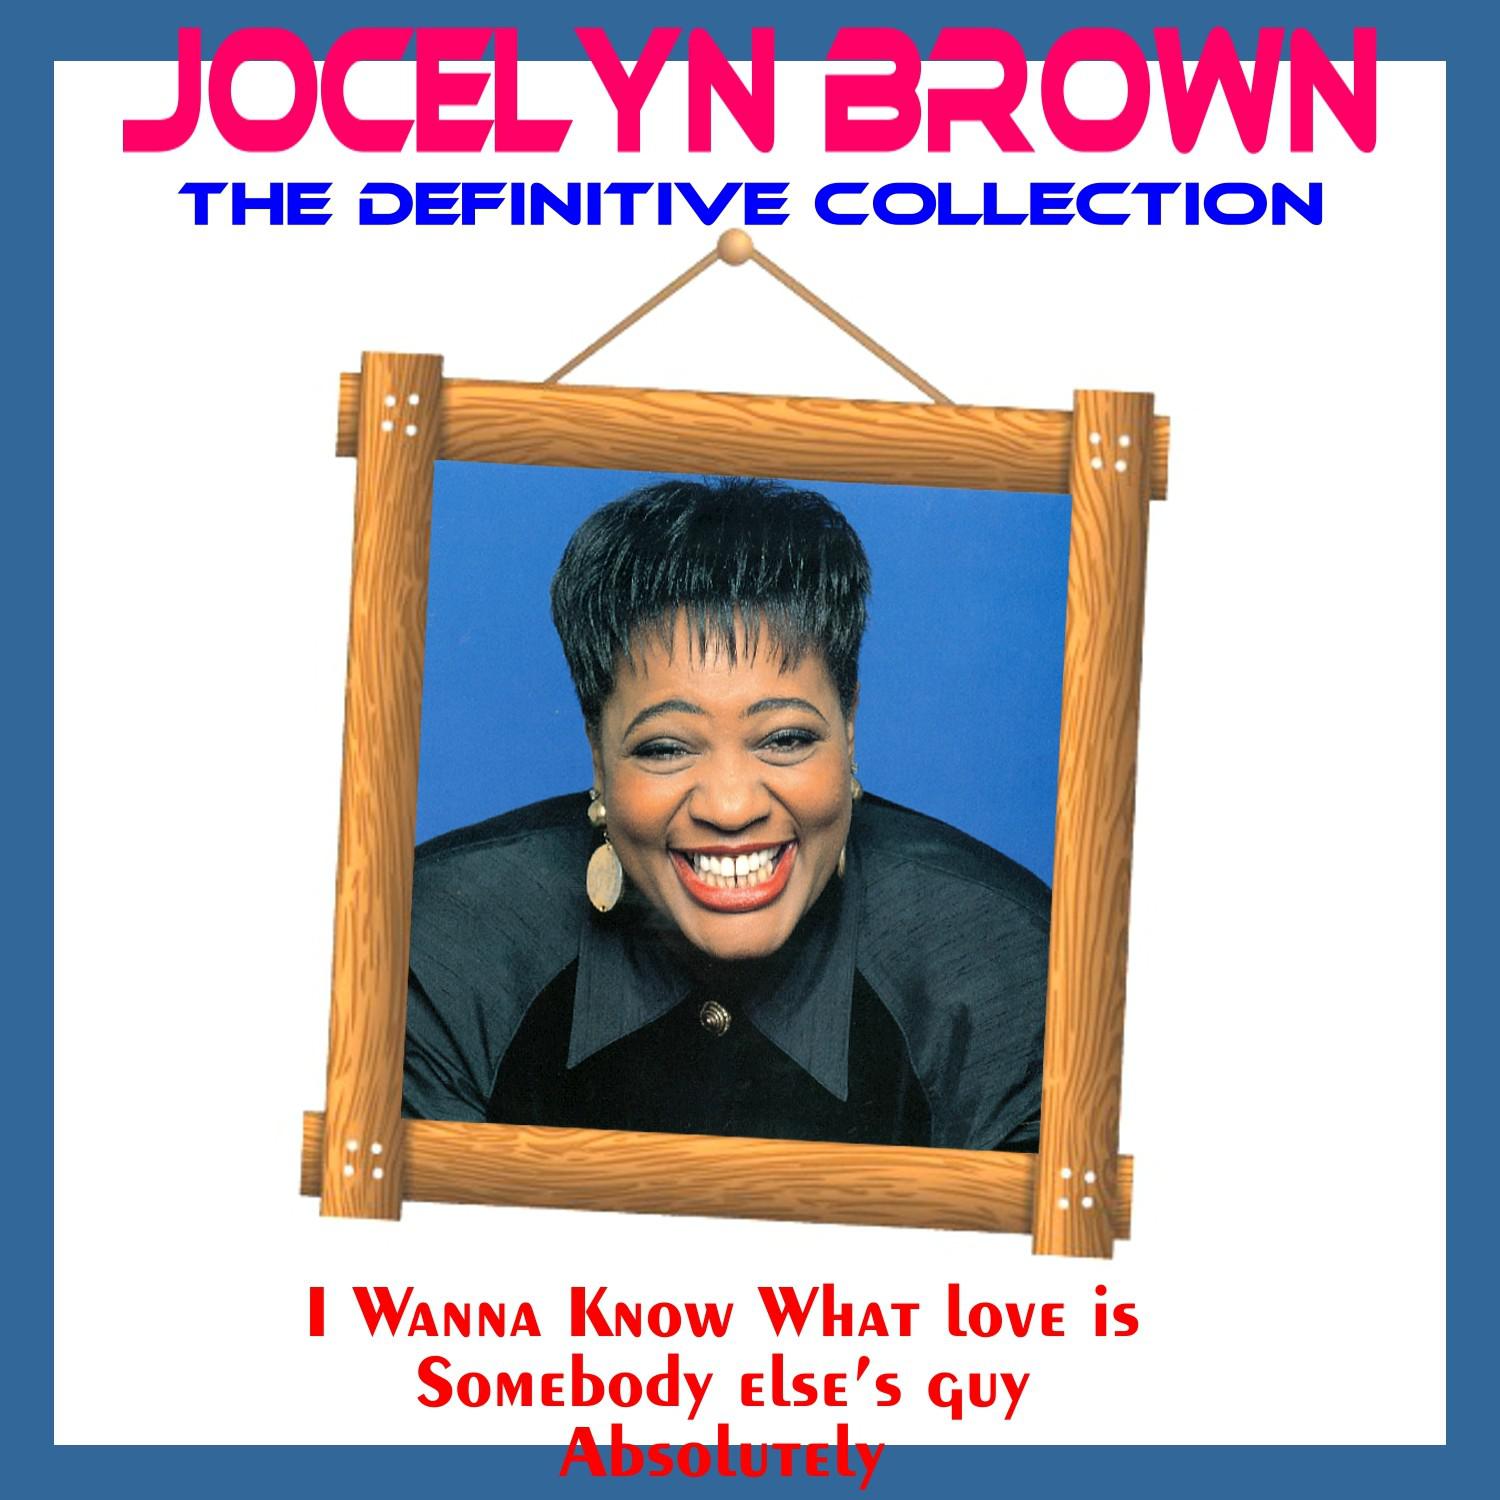 Jocelyn Brown: The Definitive Collection